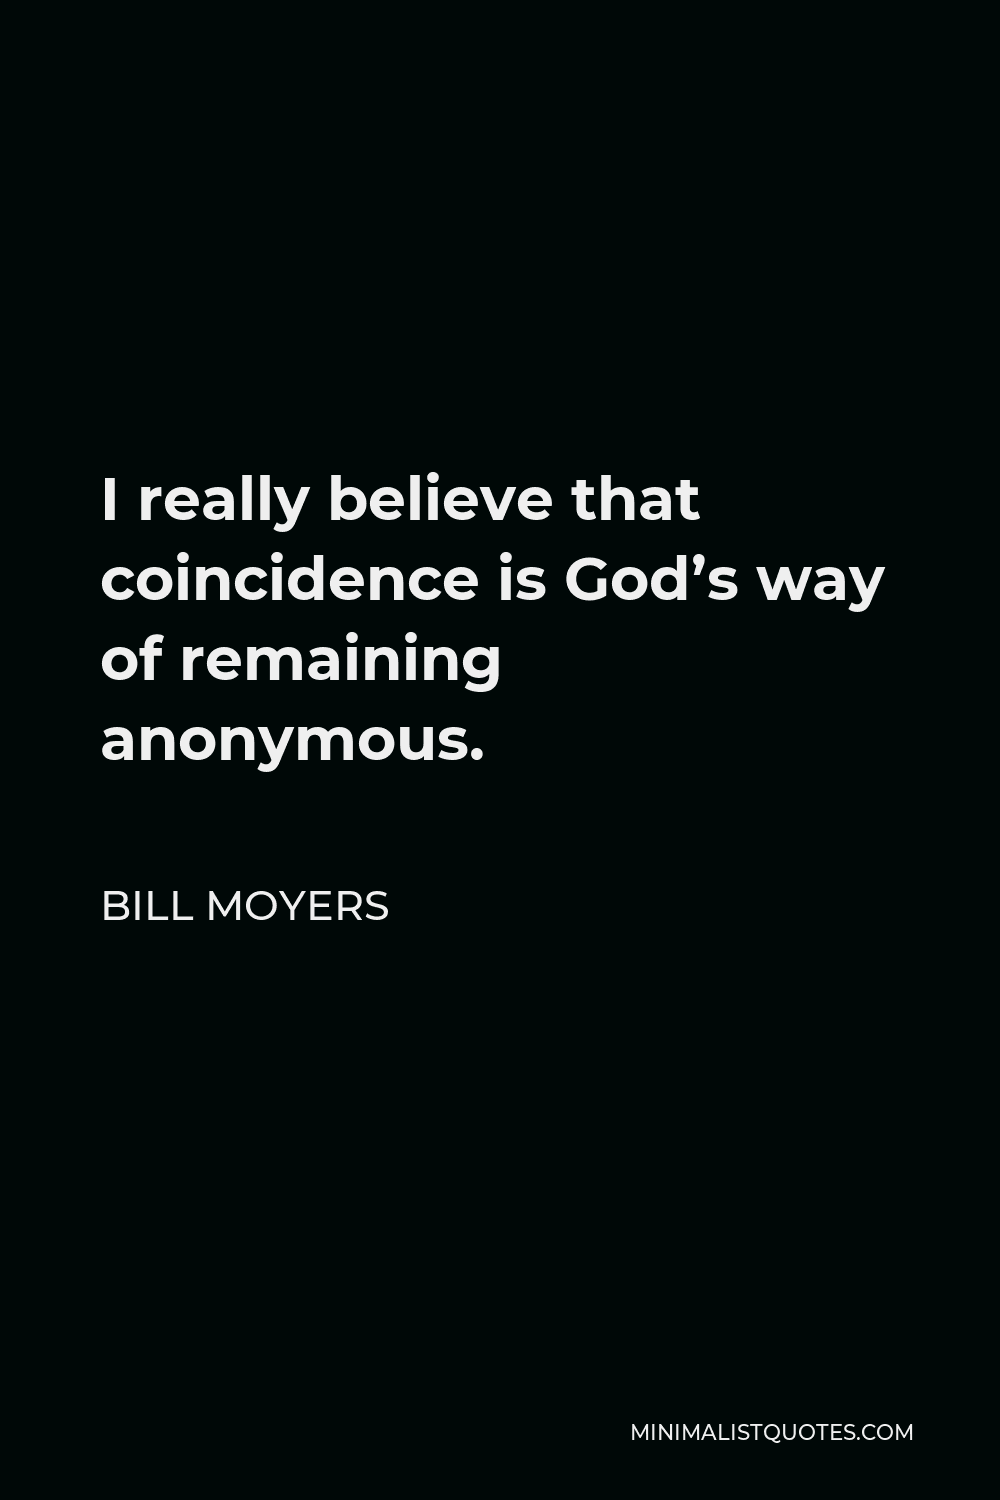 Bill Moyers Quote - I really believe that coincidence is God’s way of remaining anonymous.